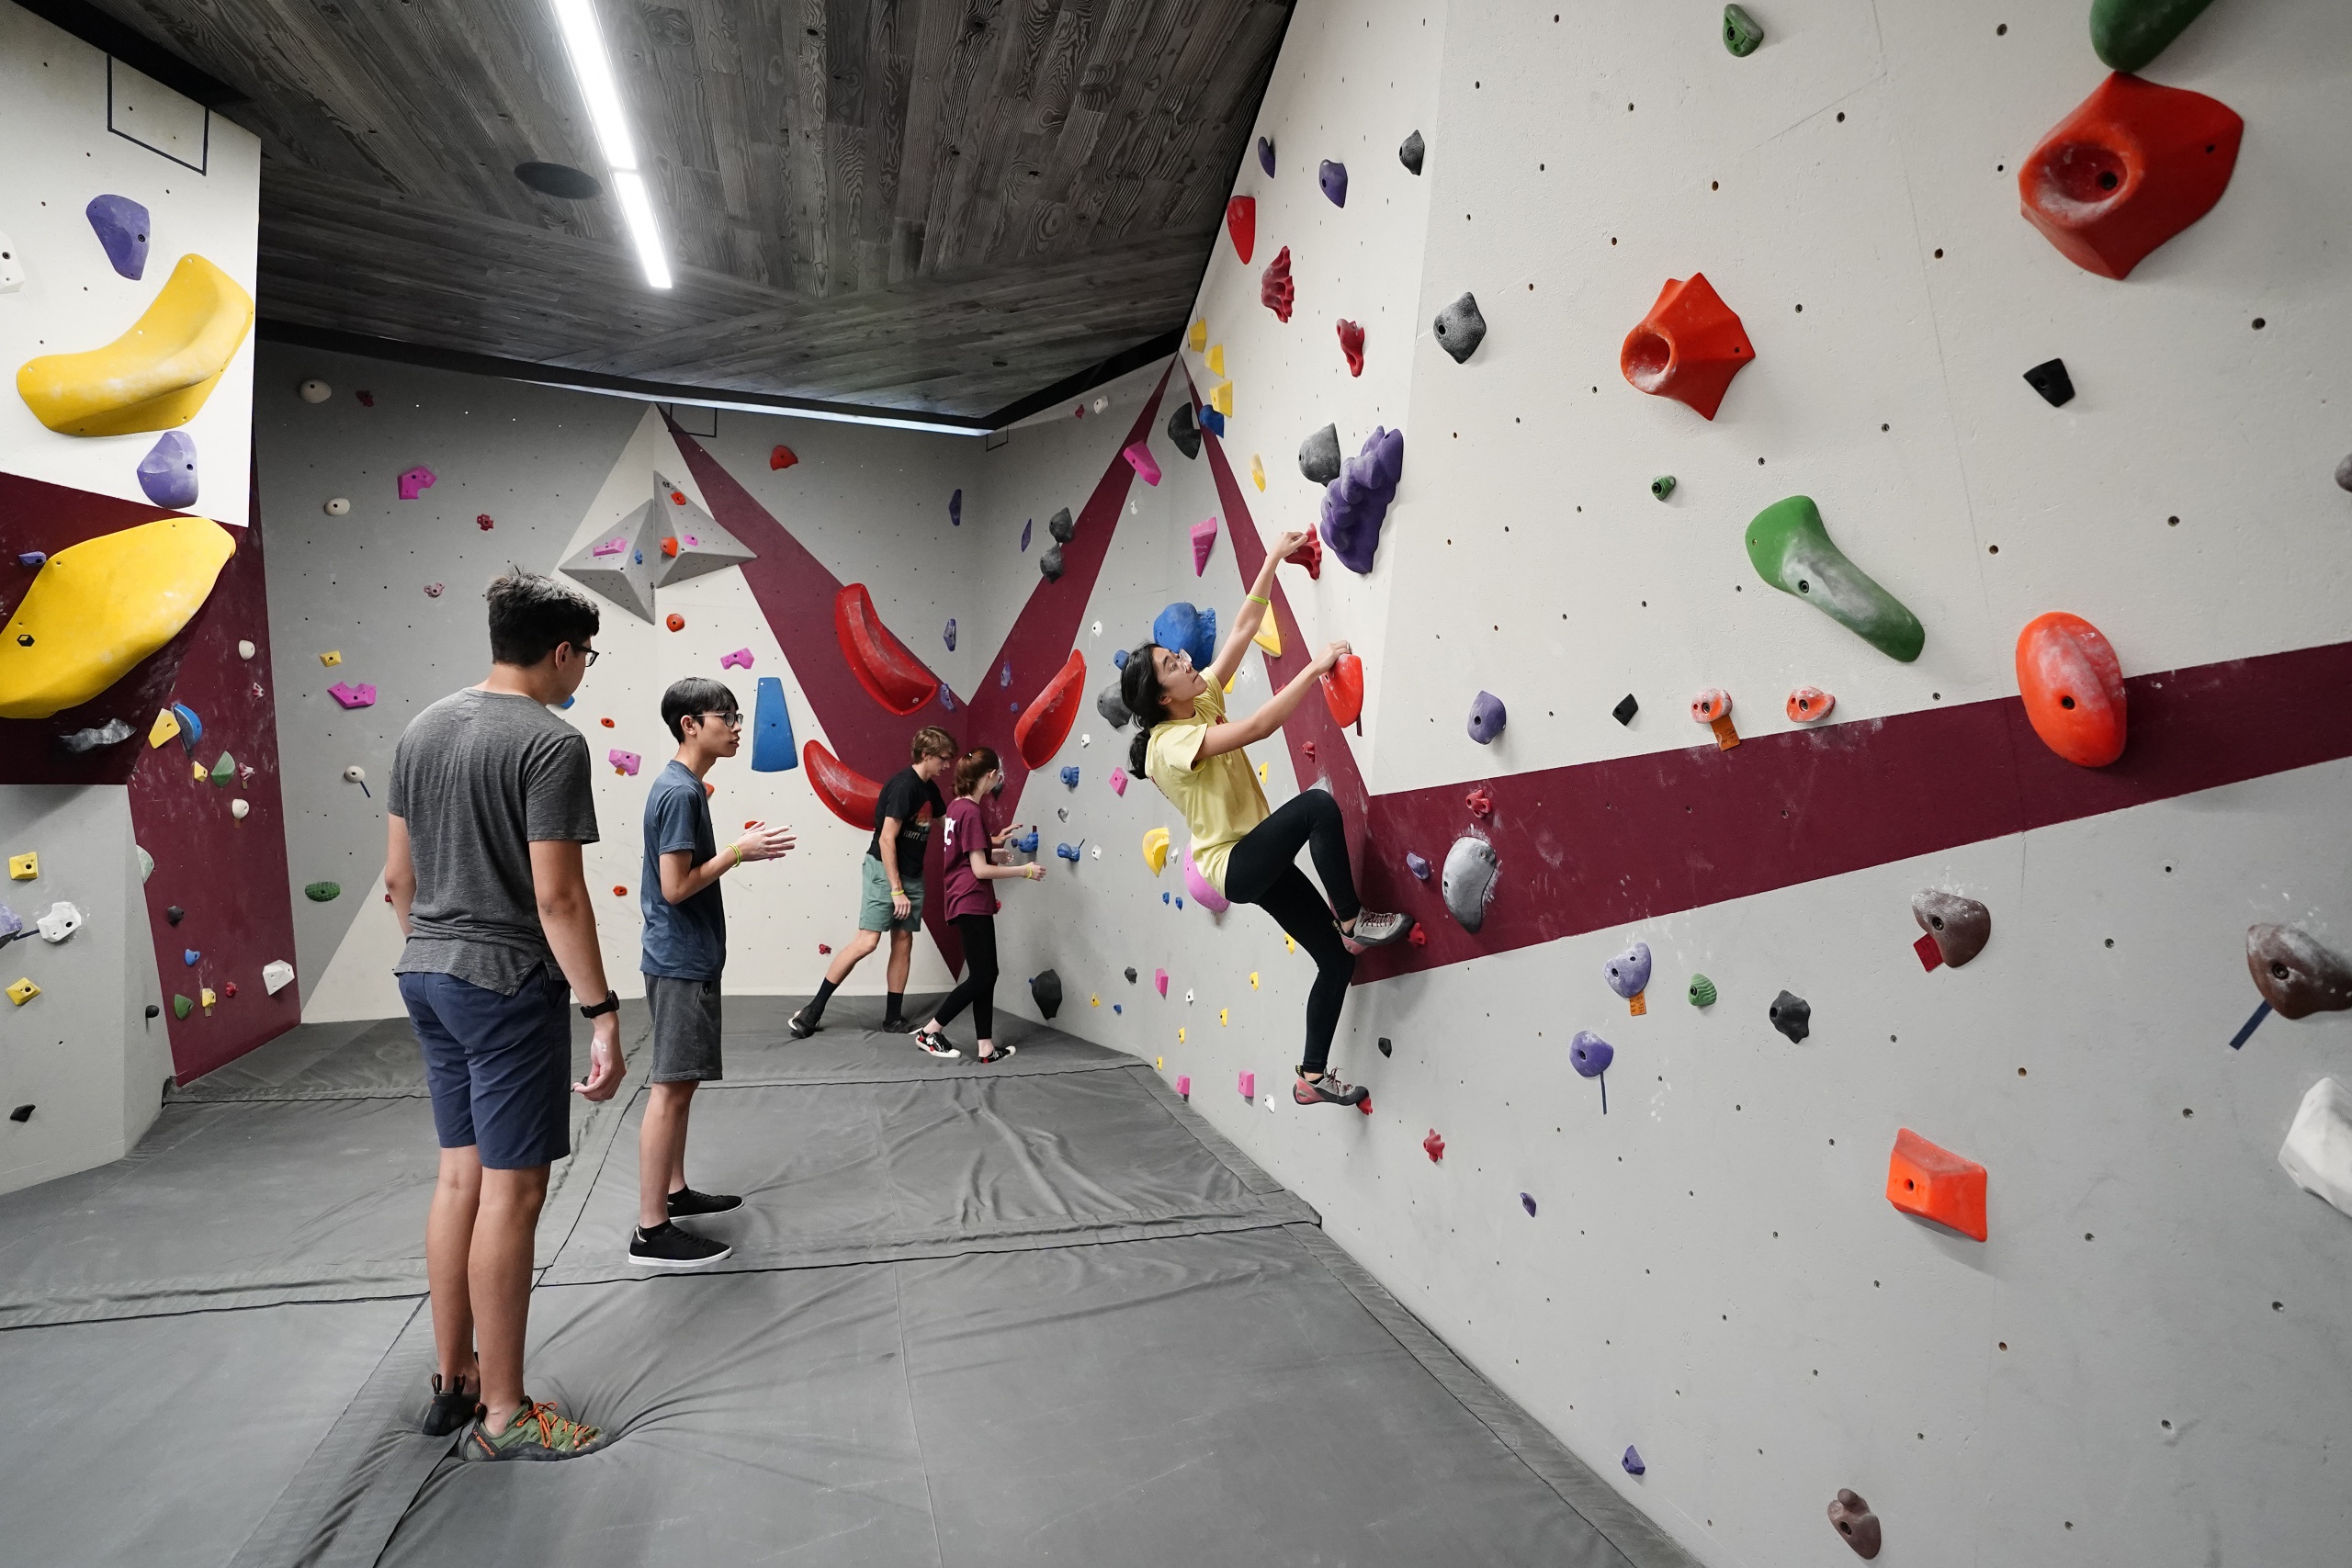 Members and guests doing free climbing on the bouldering wall in the Southside Rec Center